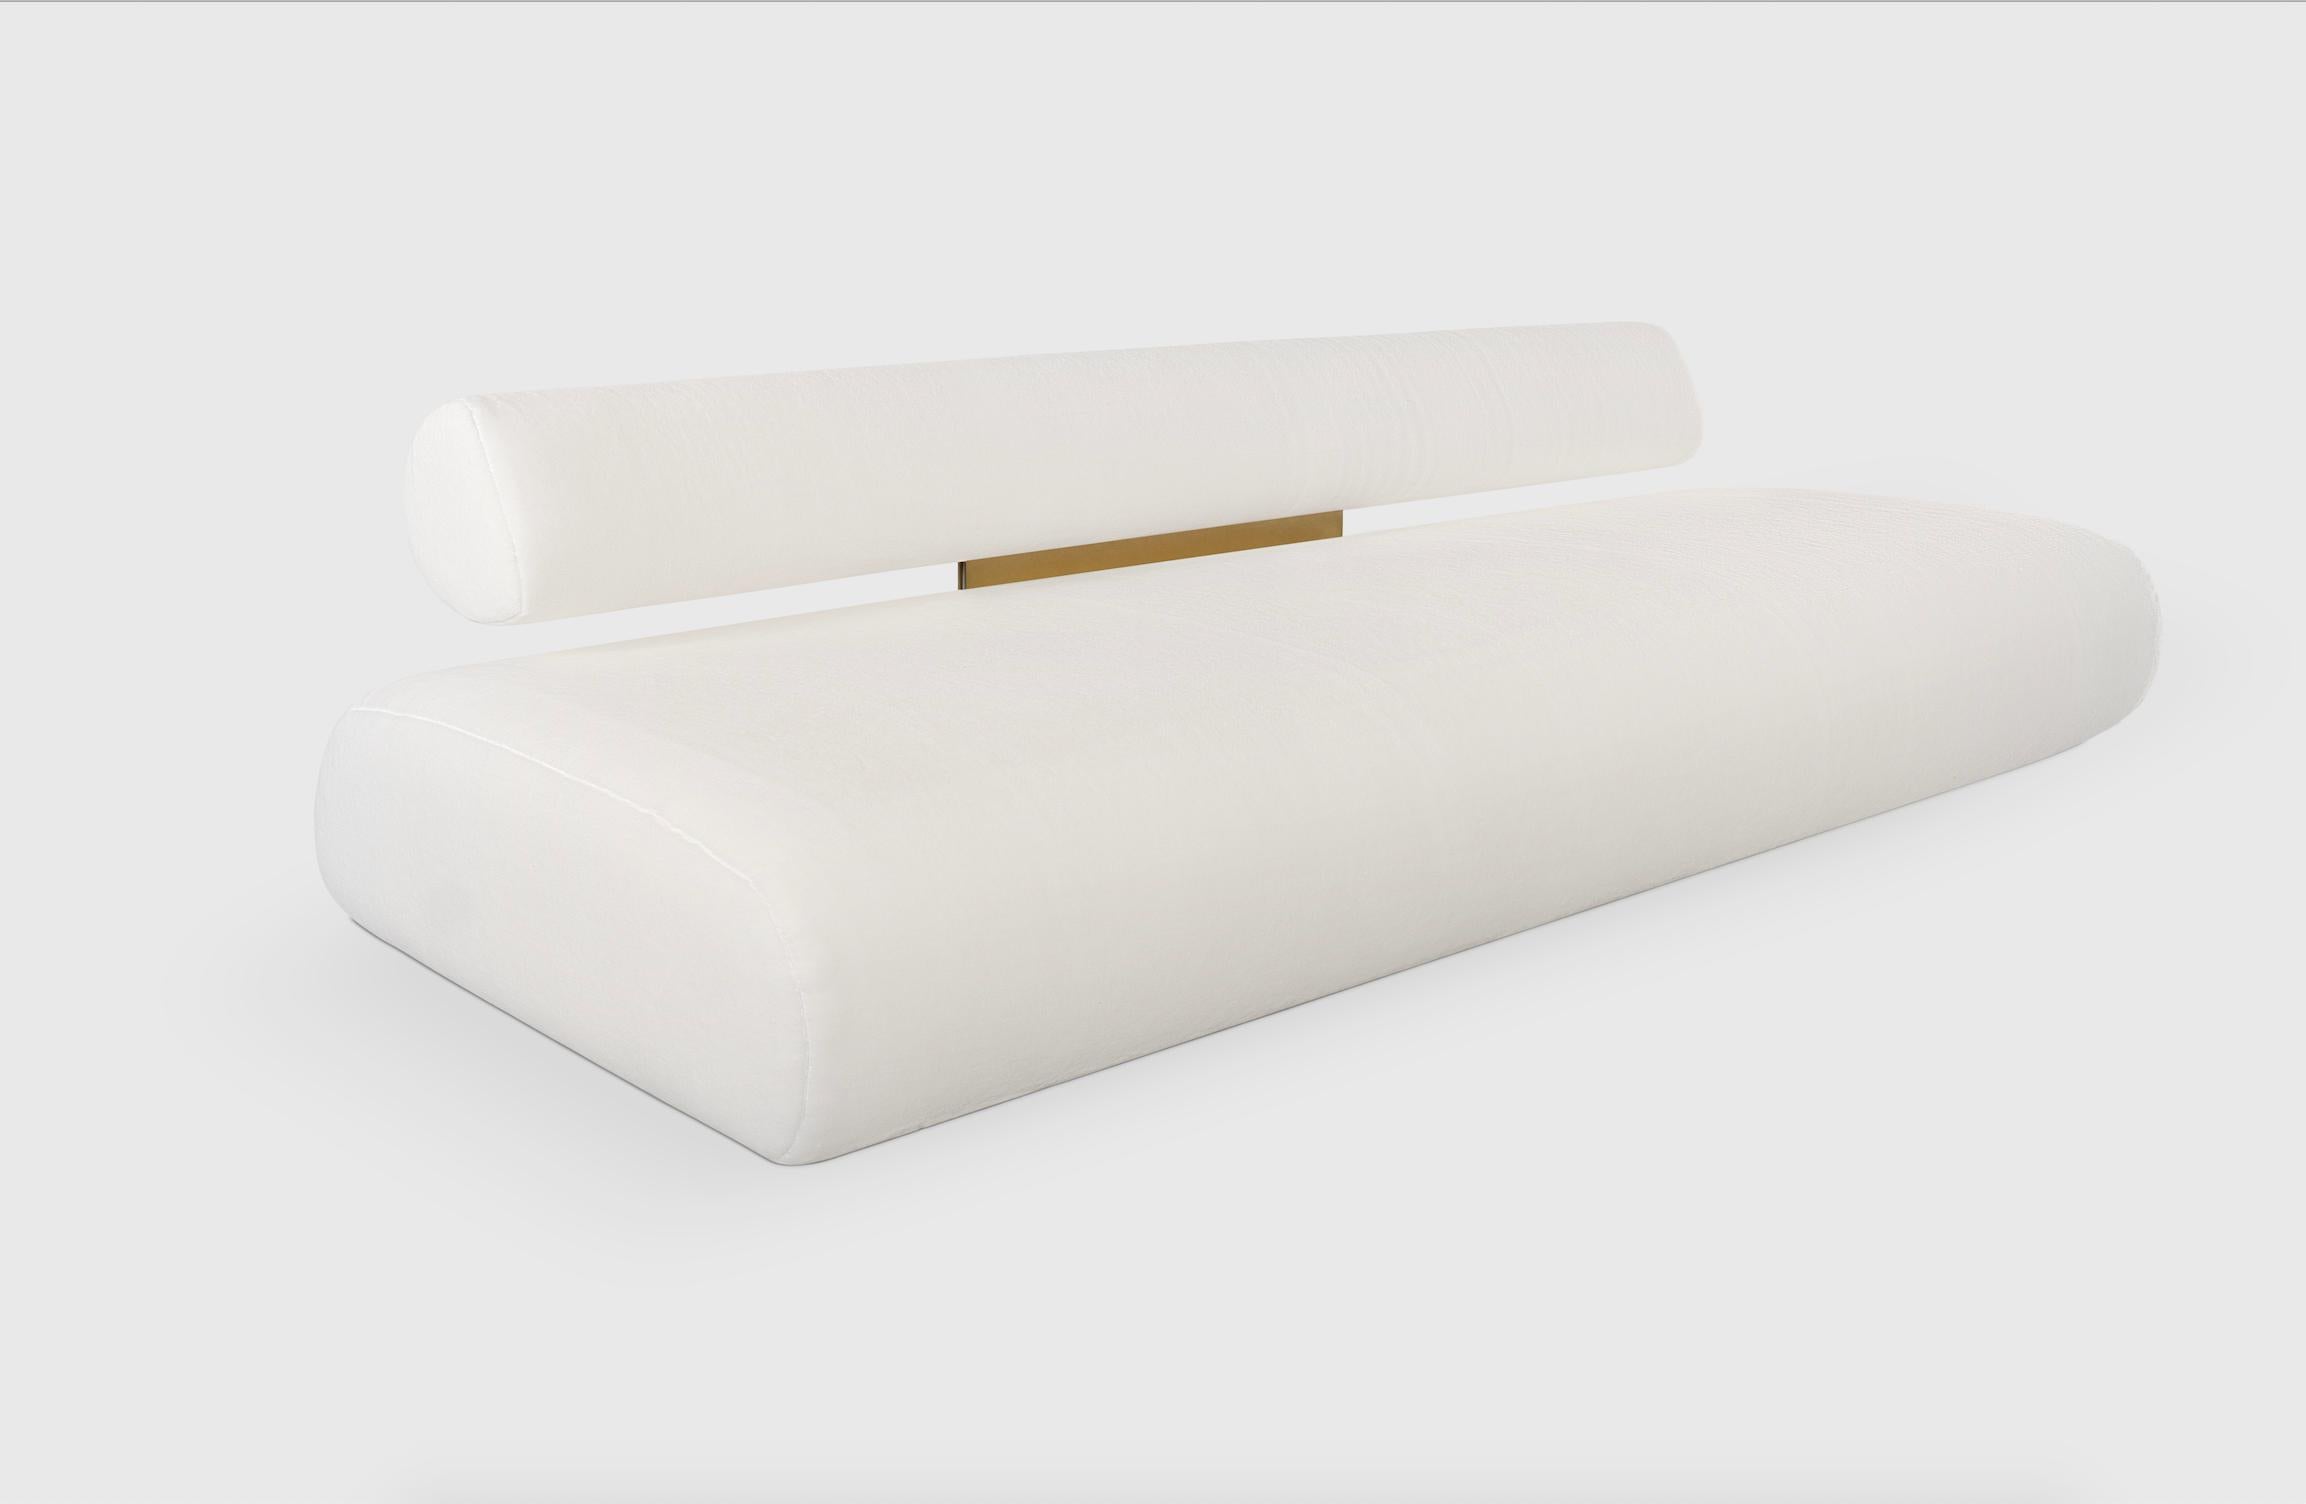 Baby Beluga sofa in shearling wool and polished brass

L 180.0cm/70.8